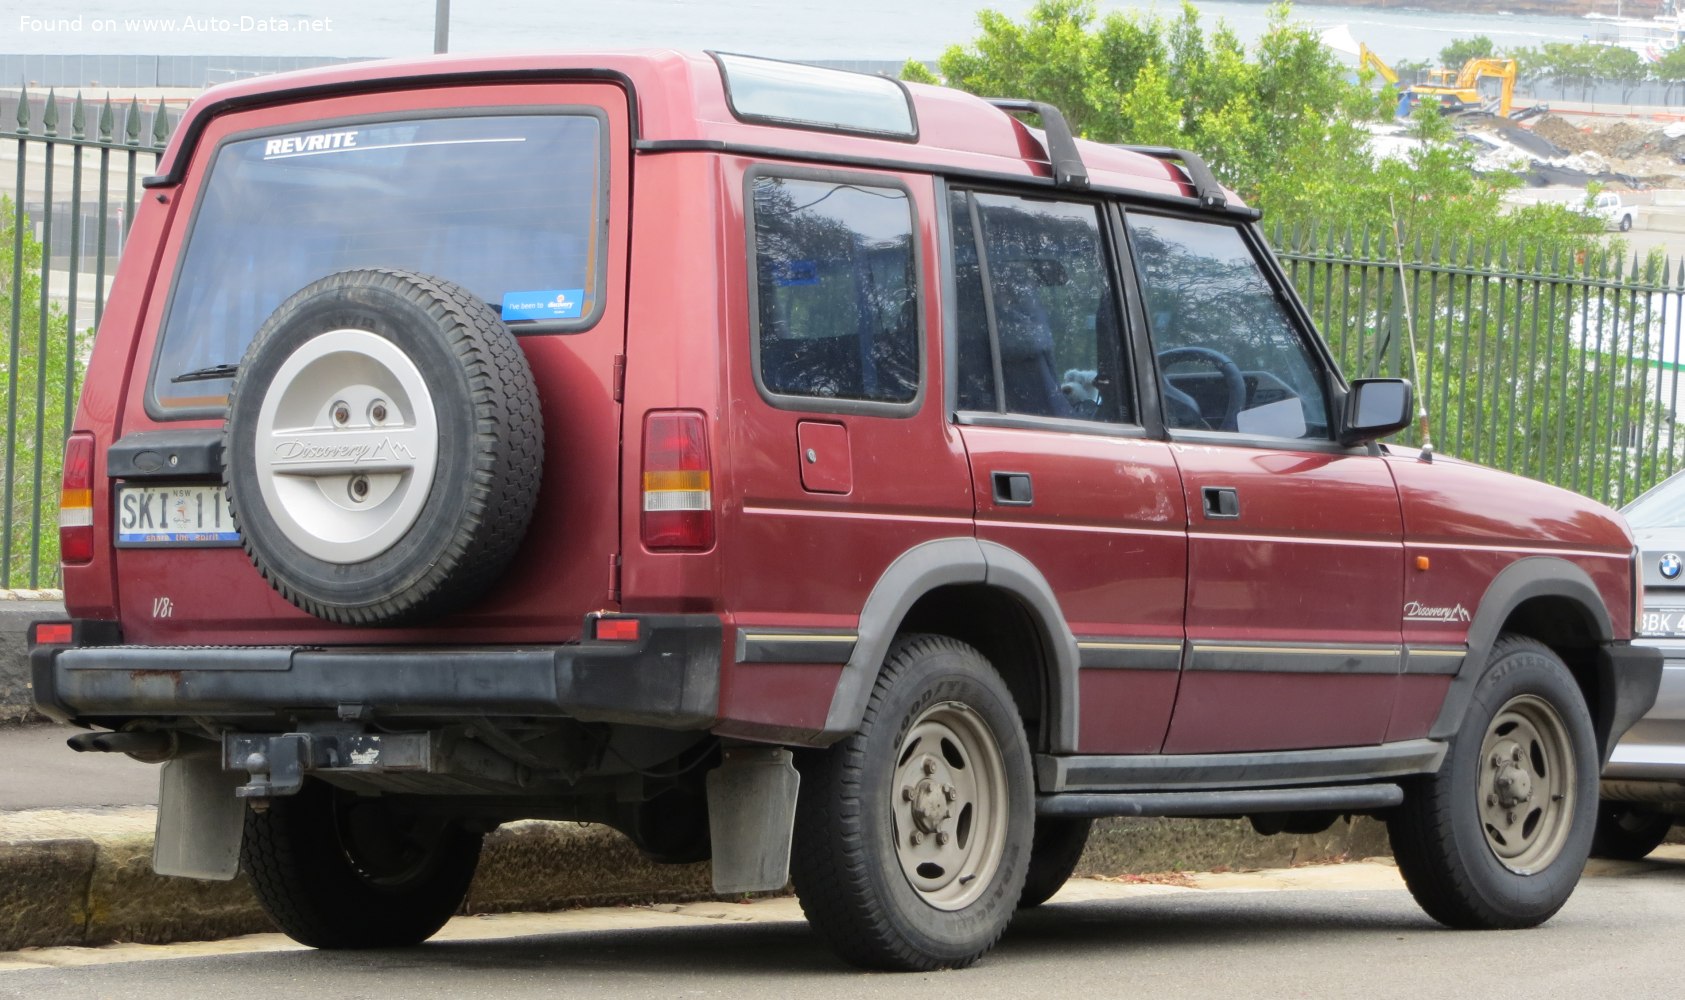 Discovery 1 8. 1995 Land-Rover Discovery 2.5 TDI. Rover Maestro. Discovery вагон. Rover 2 Door Wagon.